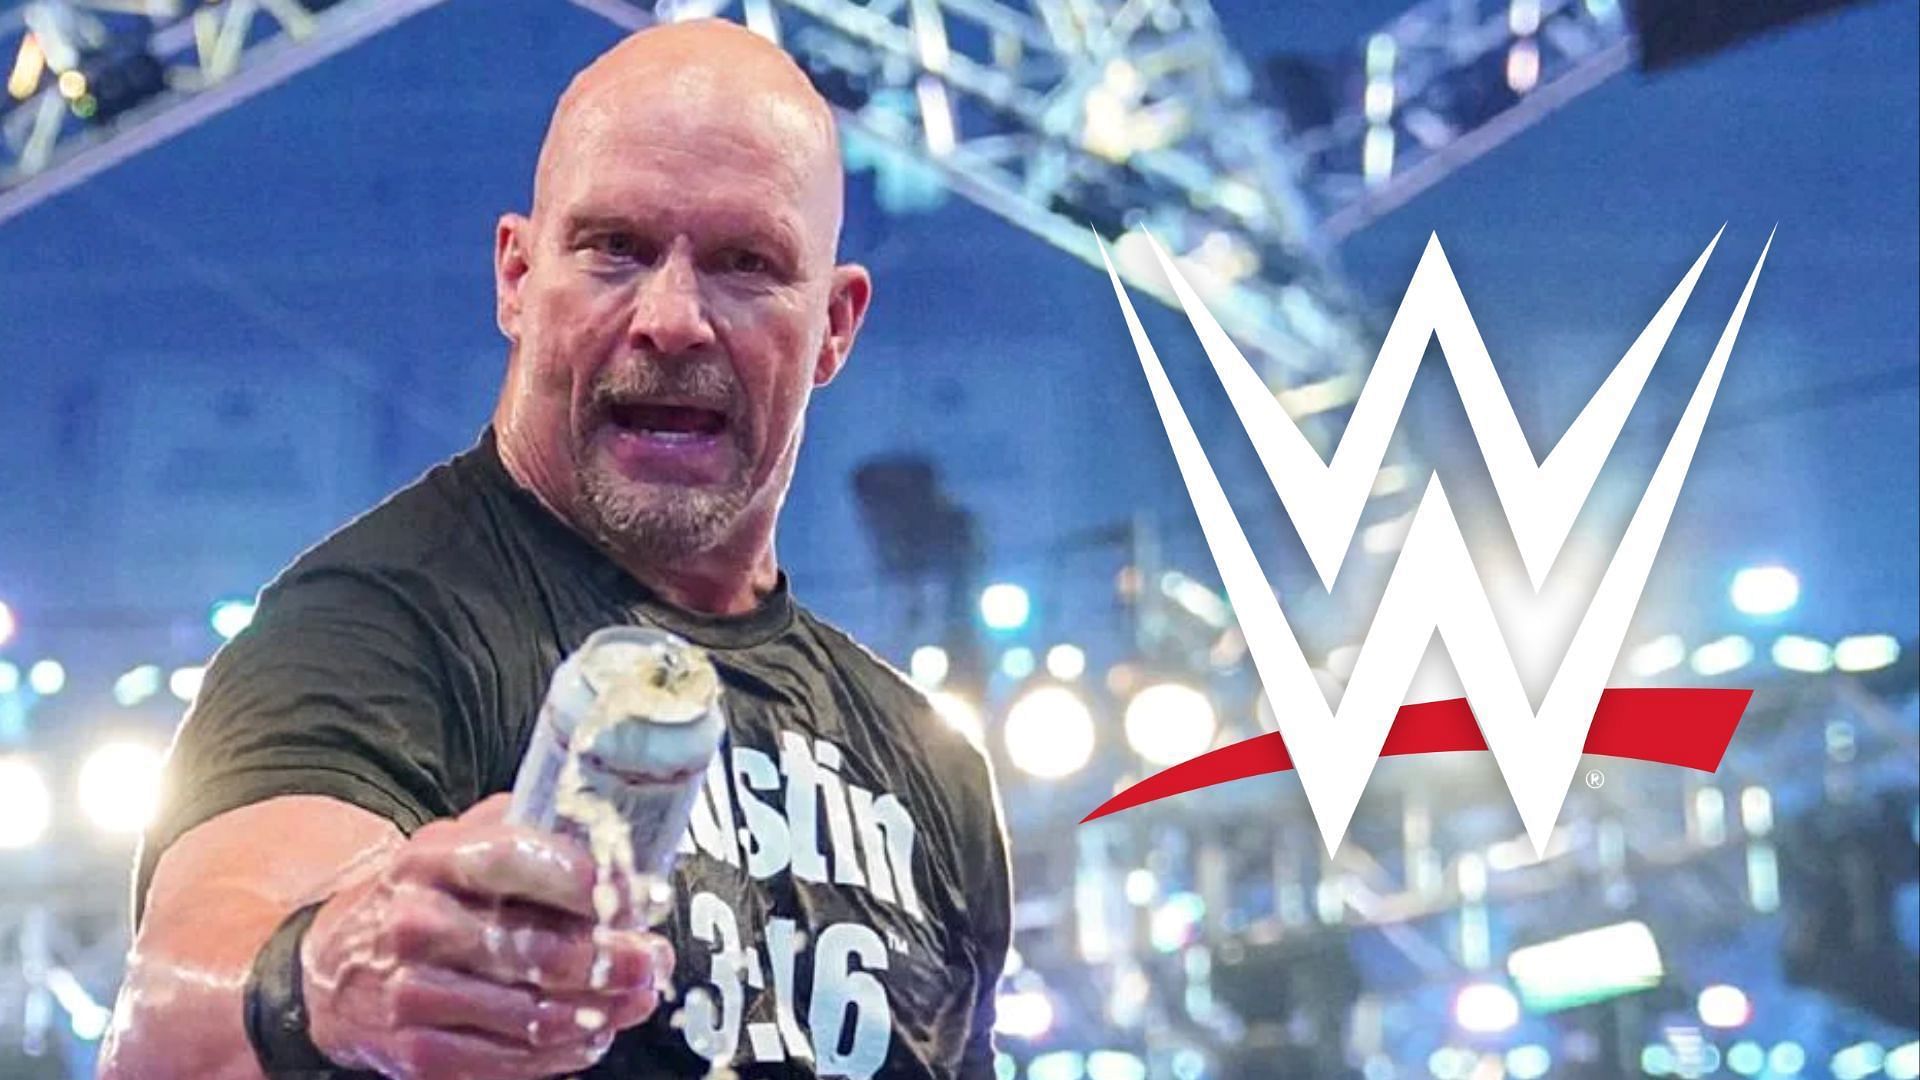 Stone Cold Steve Austin wrestled at Mania last year; may do so again this year